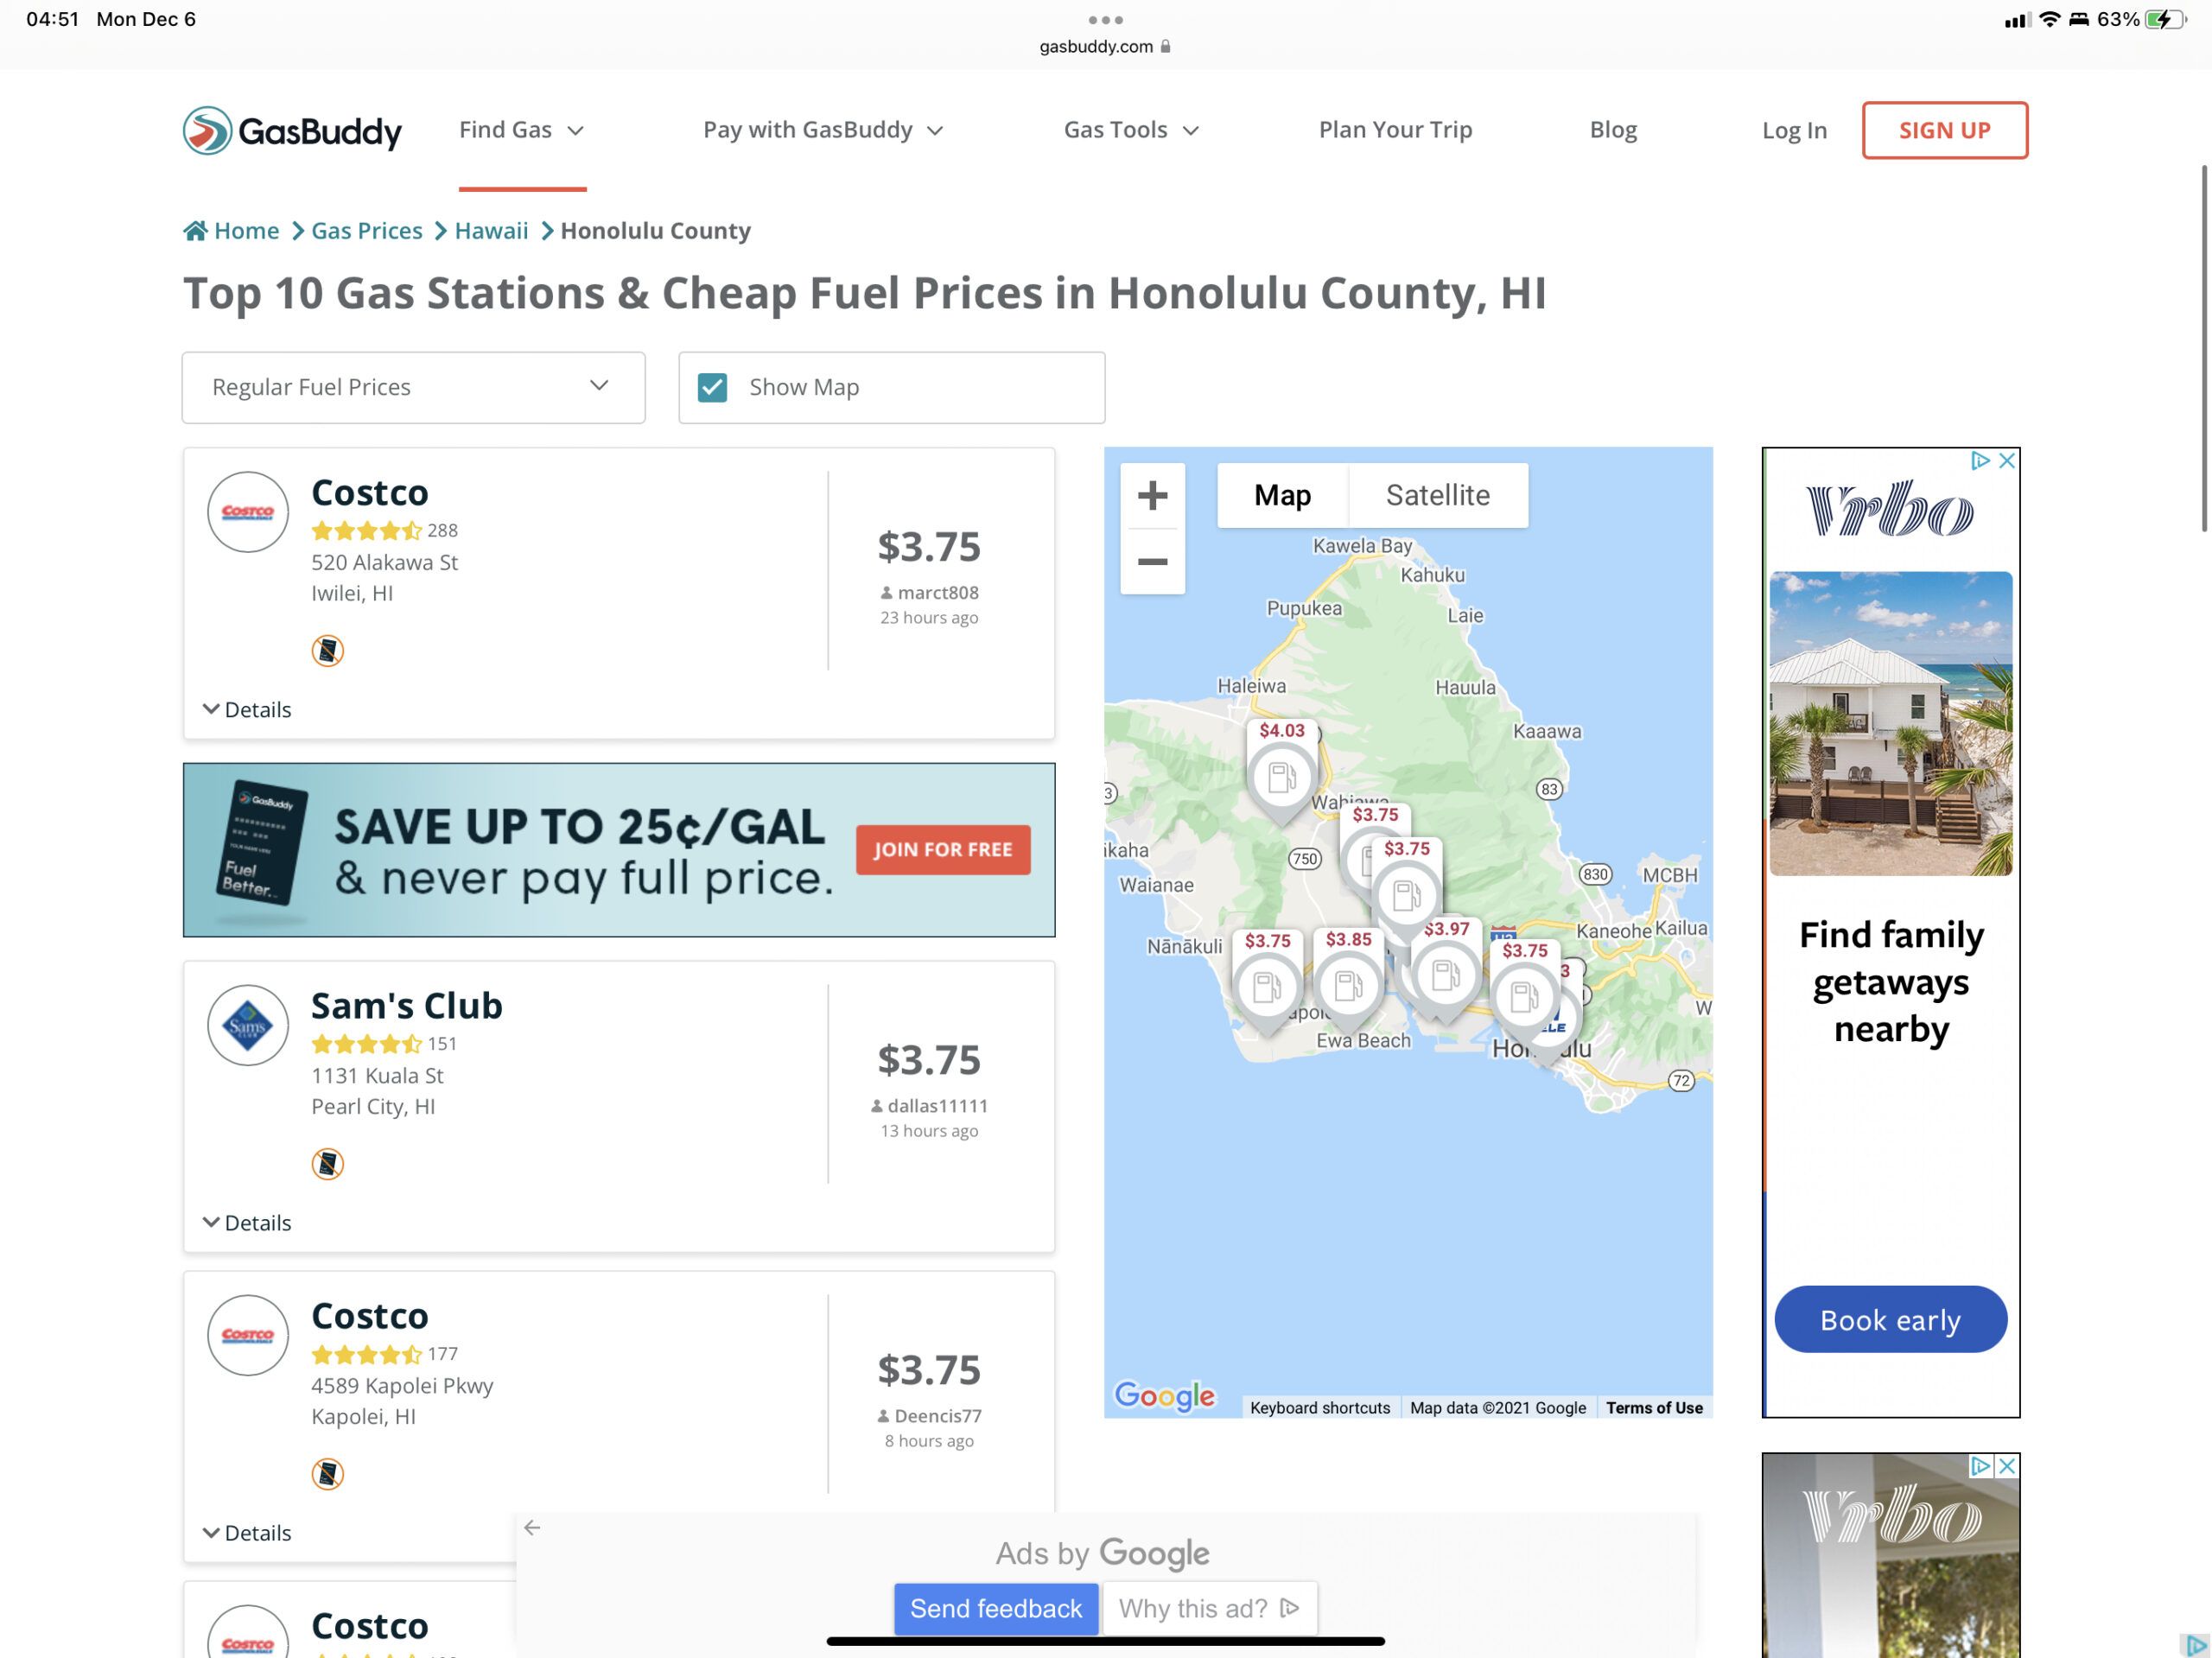 Gas prices in hawaii, cost of living in hawaii